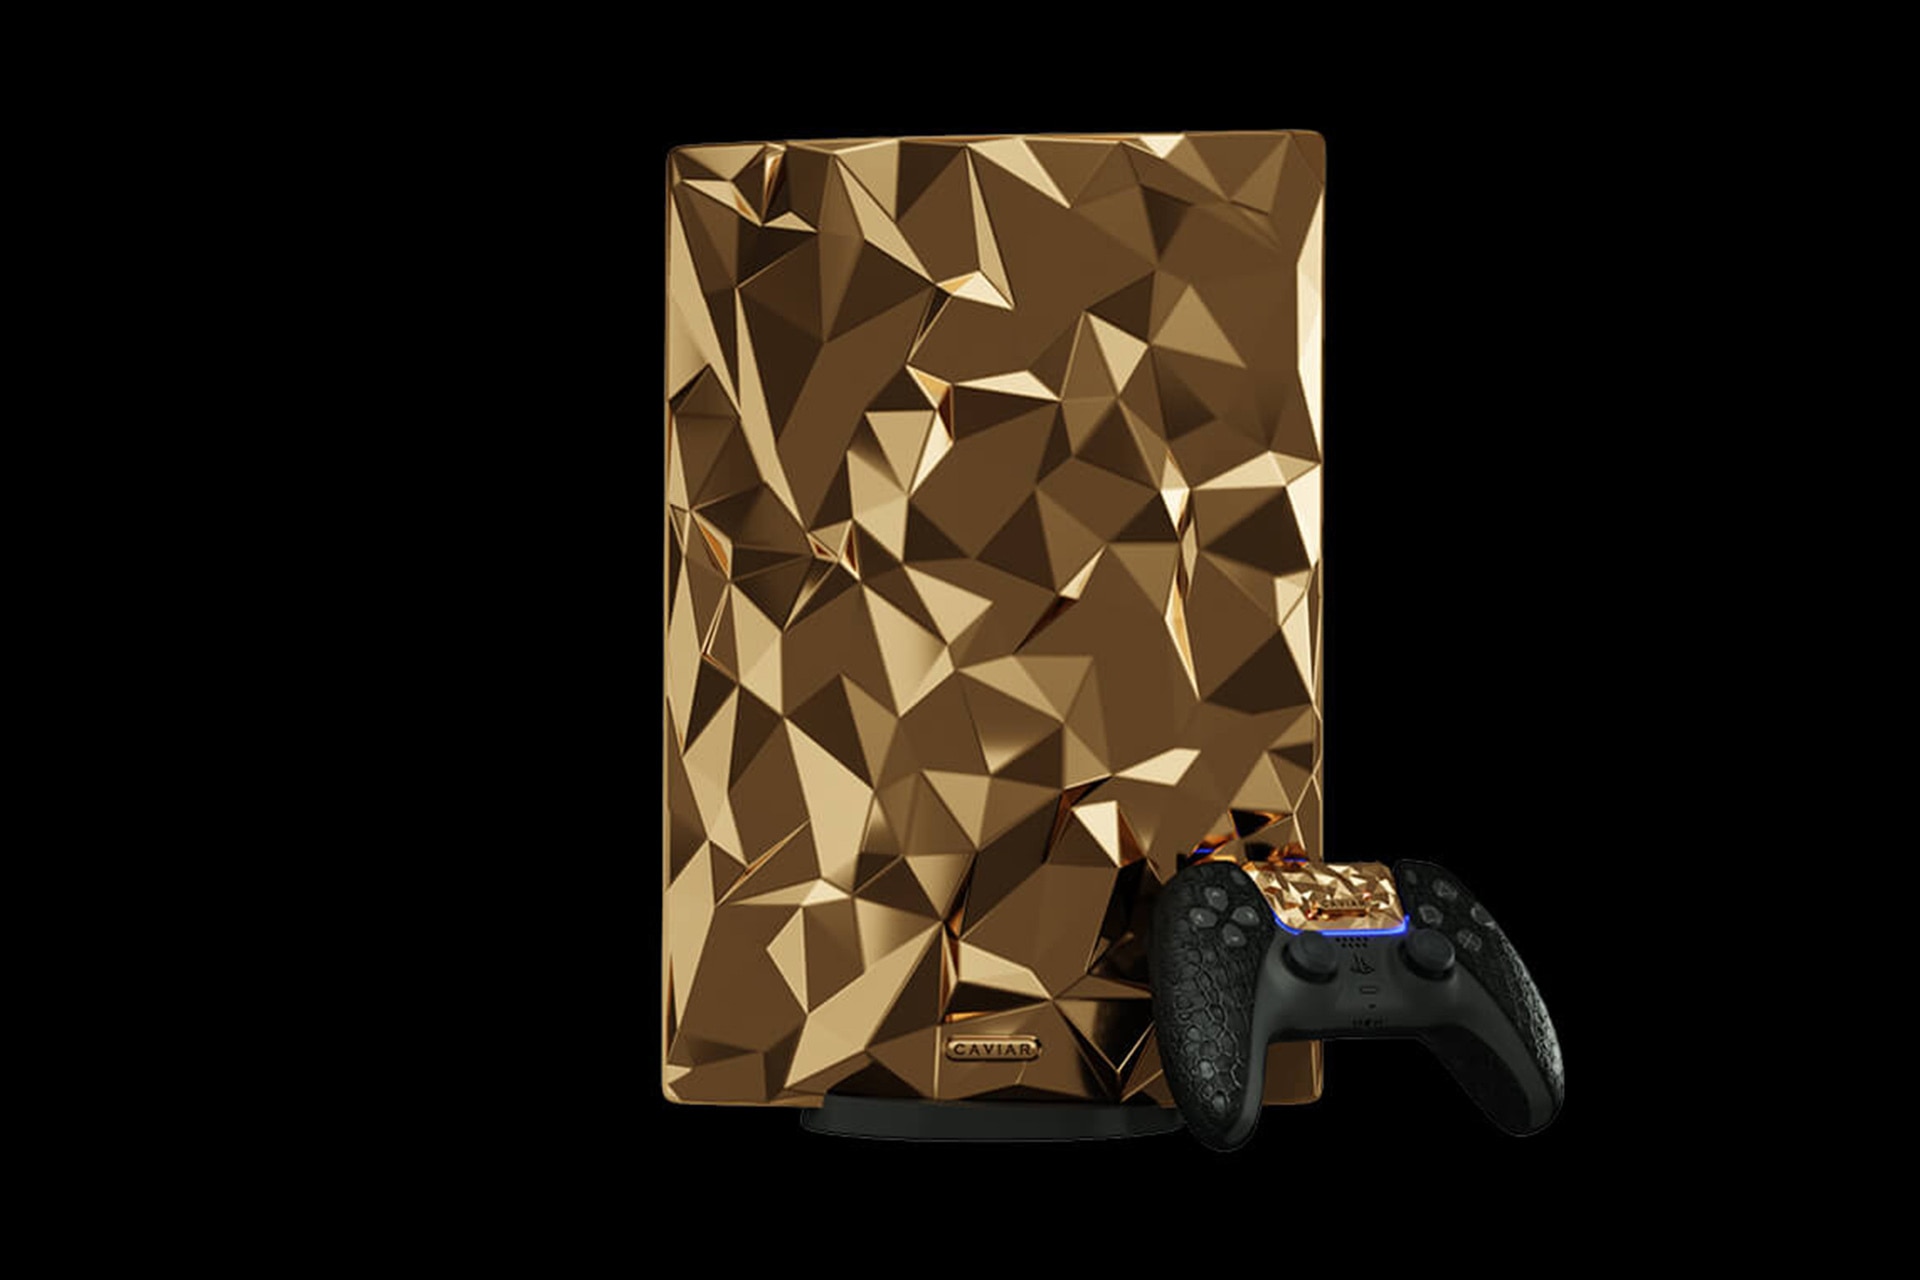 24k Gold Playstation 5, Truly Exquisite